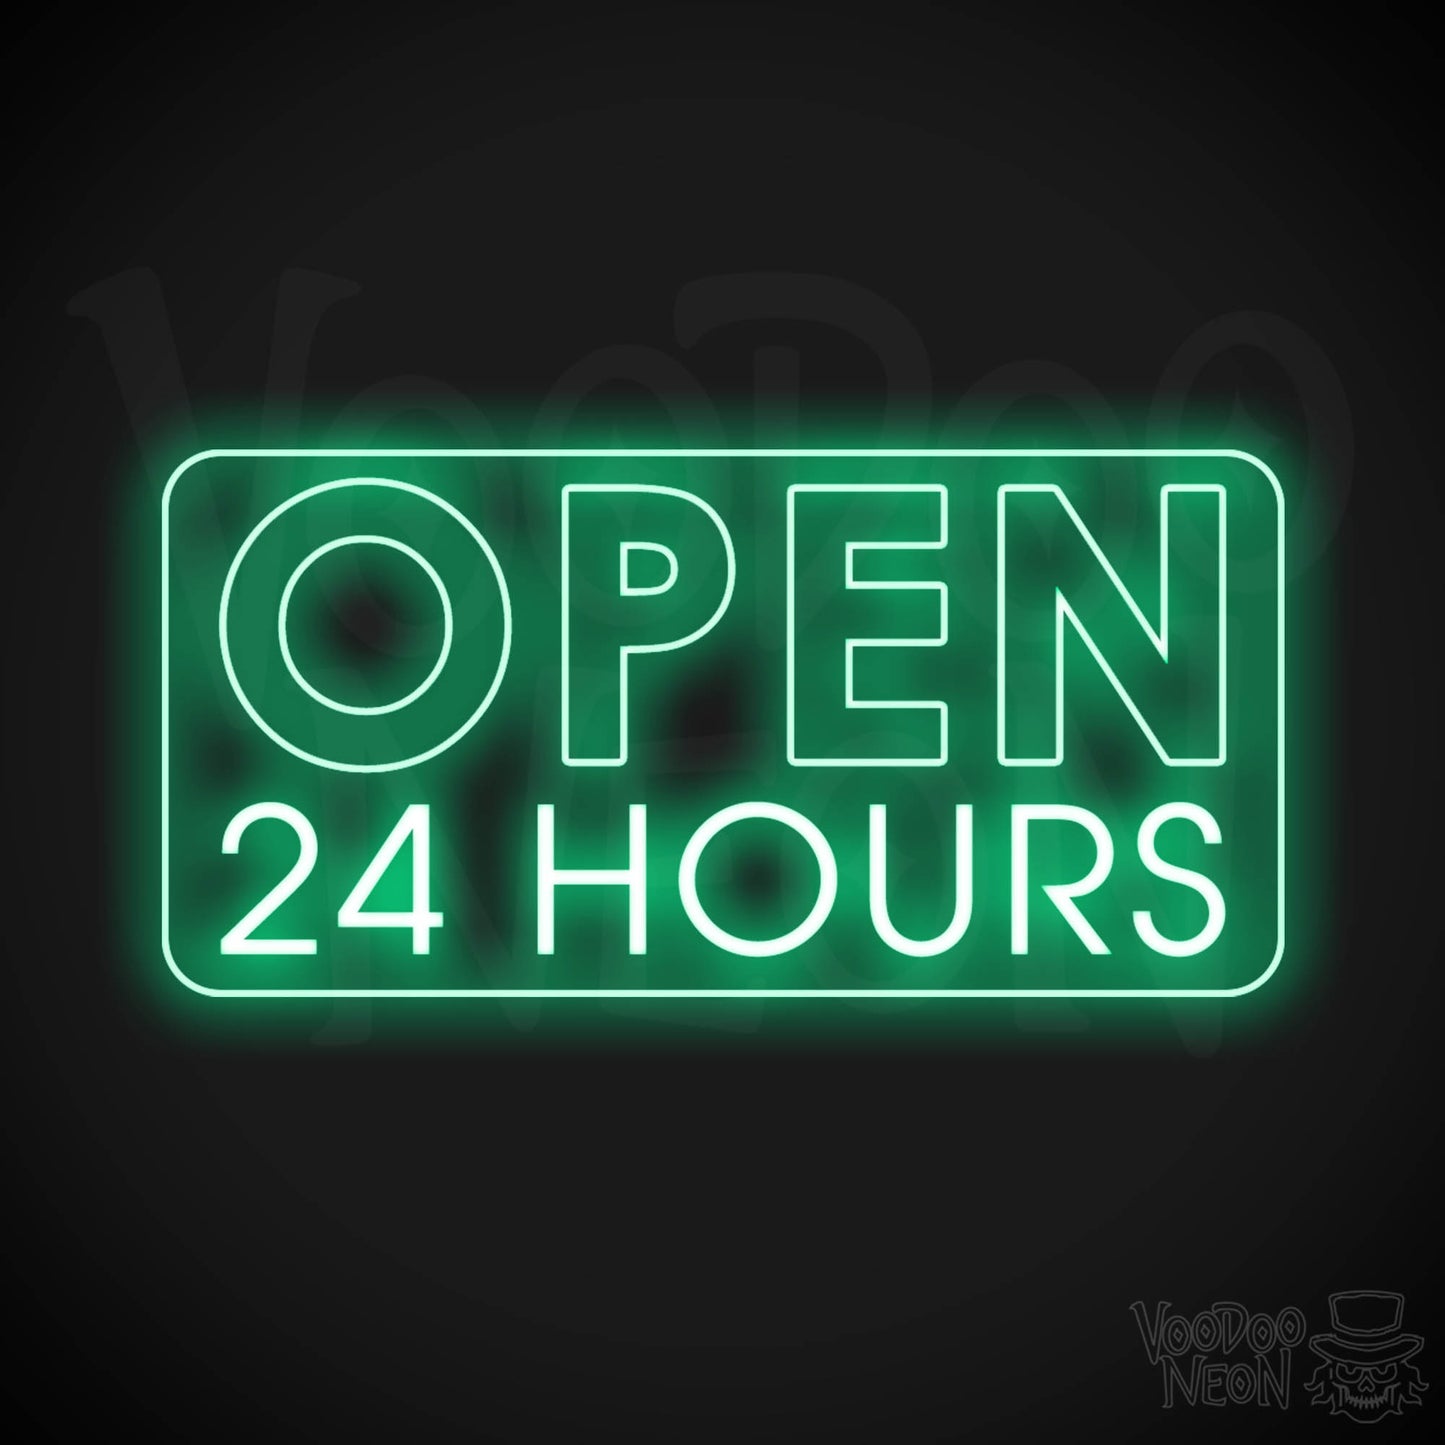 Open 24 Hours Neon Sign - Neon Open 24 Hours Sign - Shop Signs - Color Green